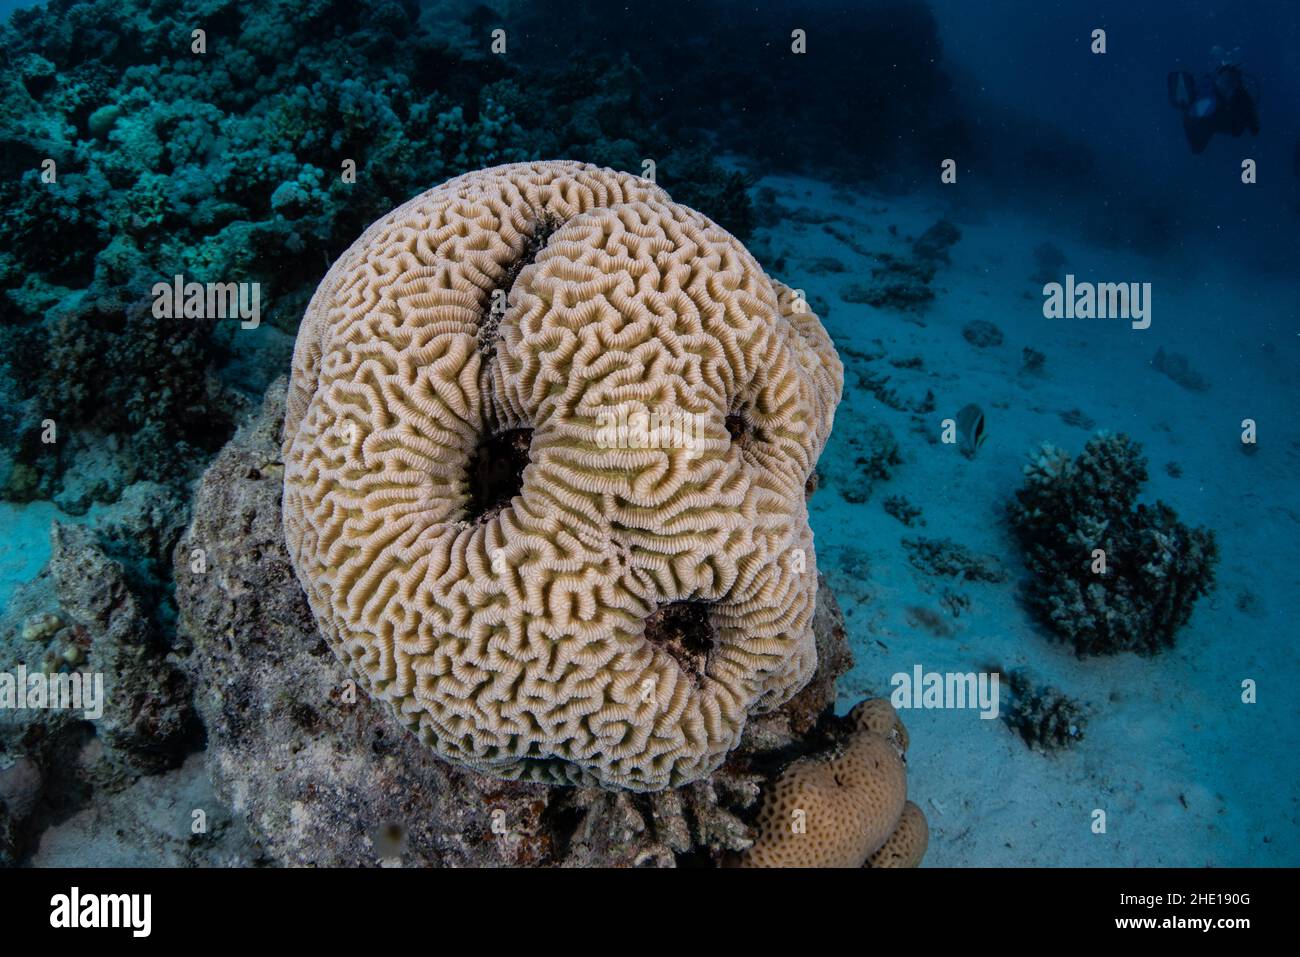 A brain coral in the red sea off the coast of Egypt. Stock Photo